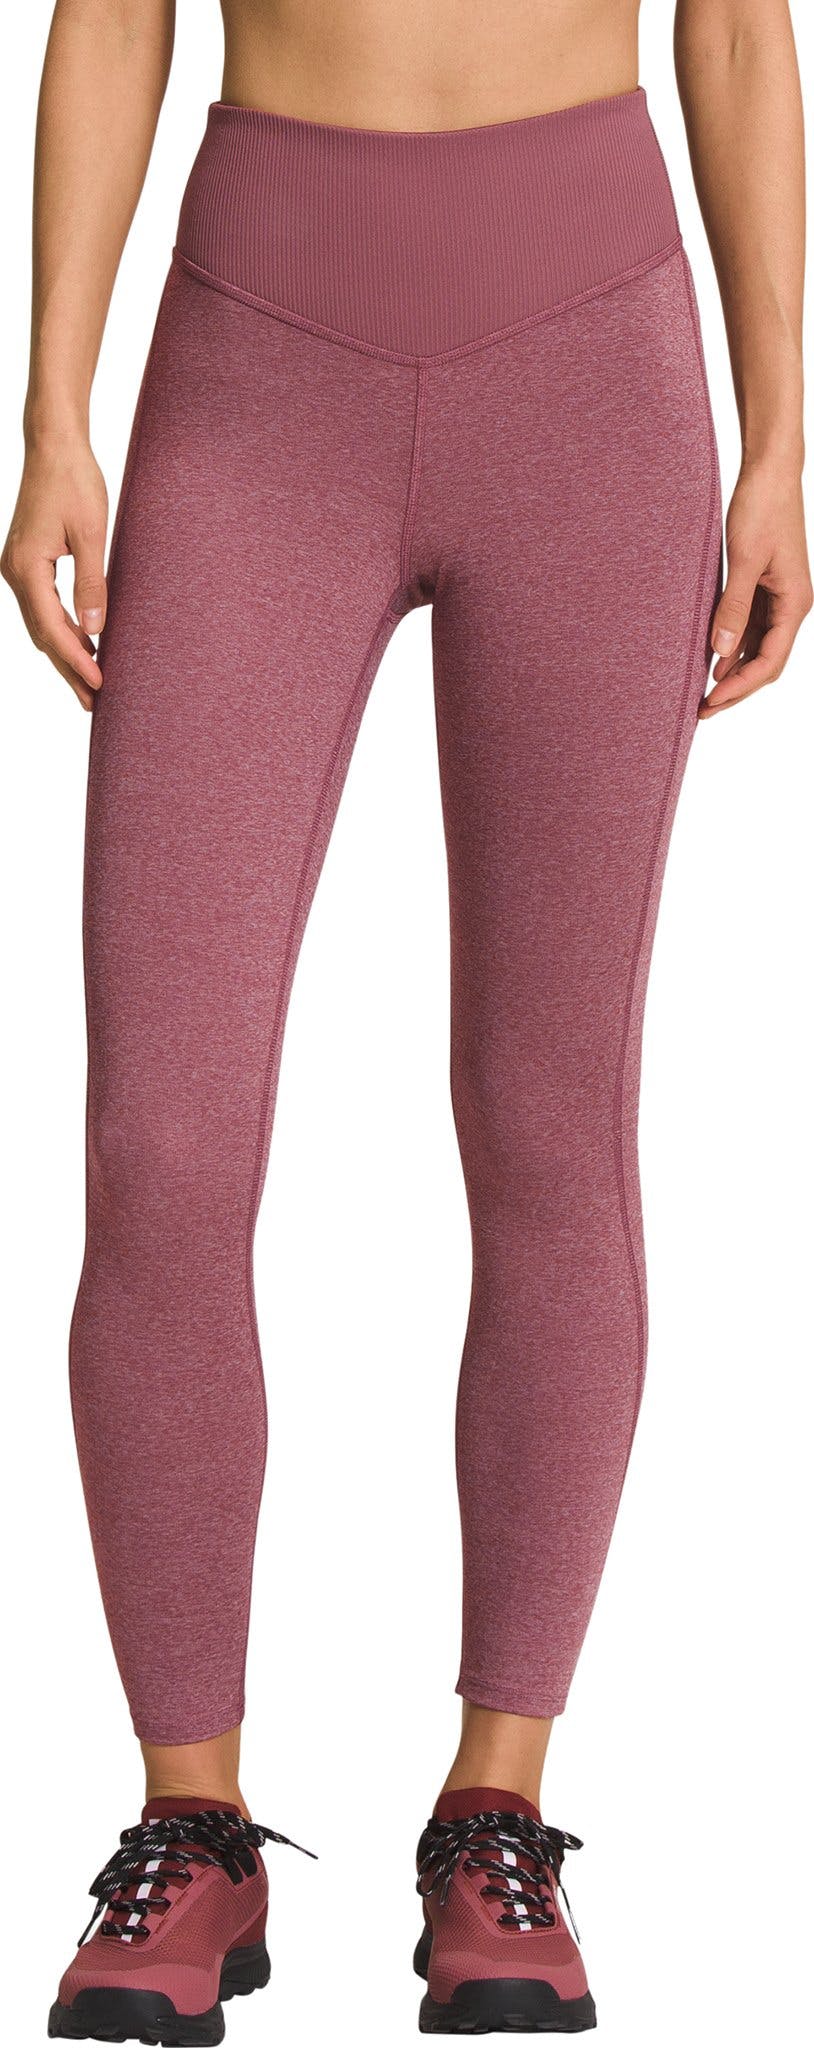 Product image for Dune Sky 7/8 Tights - Women’s